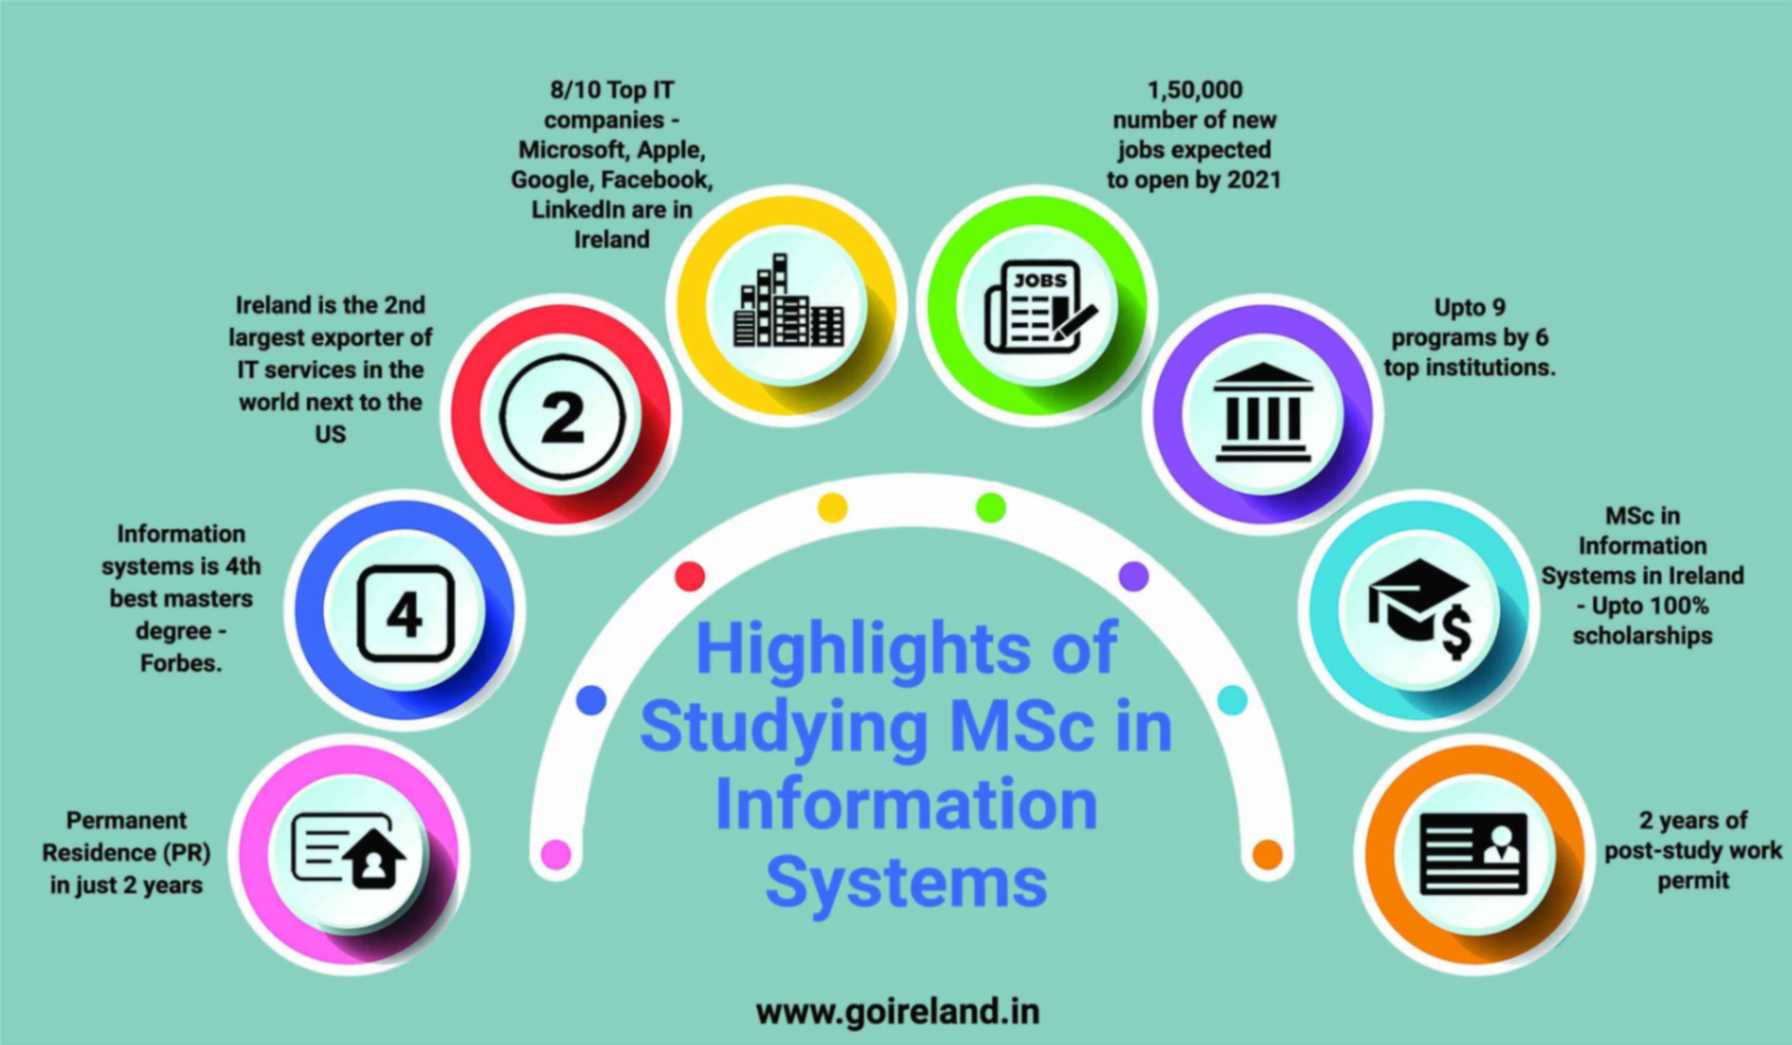 Highlights of Studying MSc in Information System